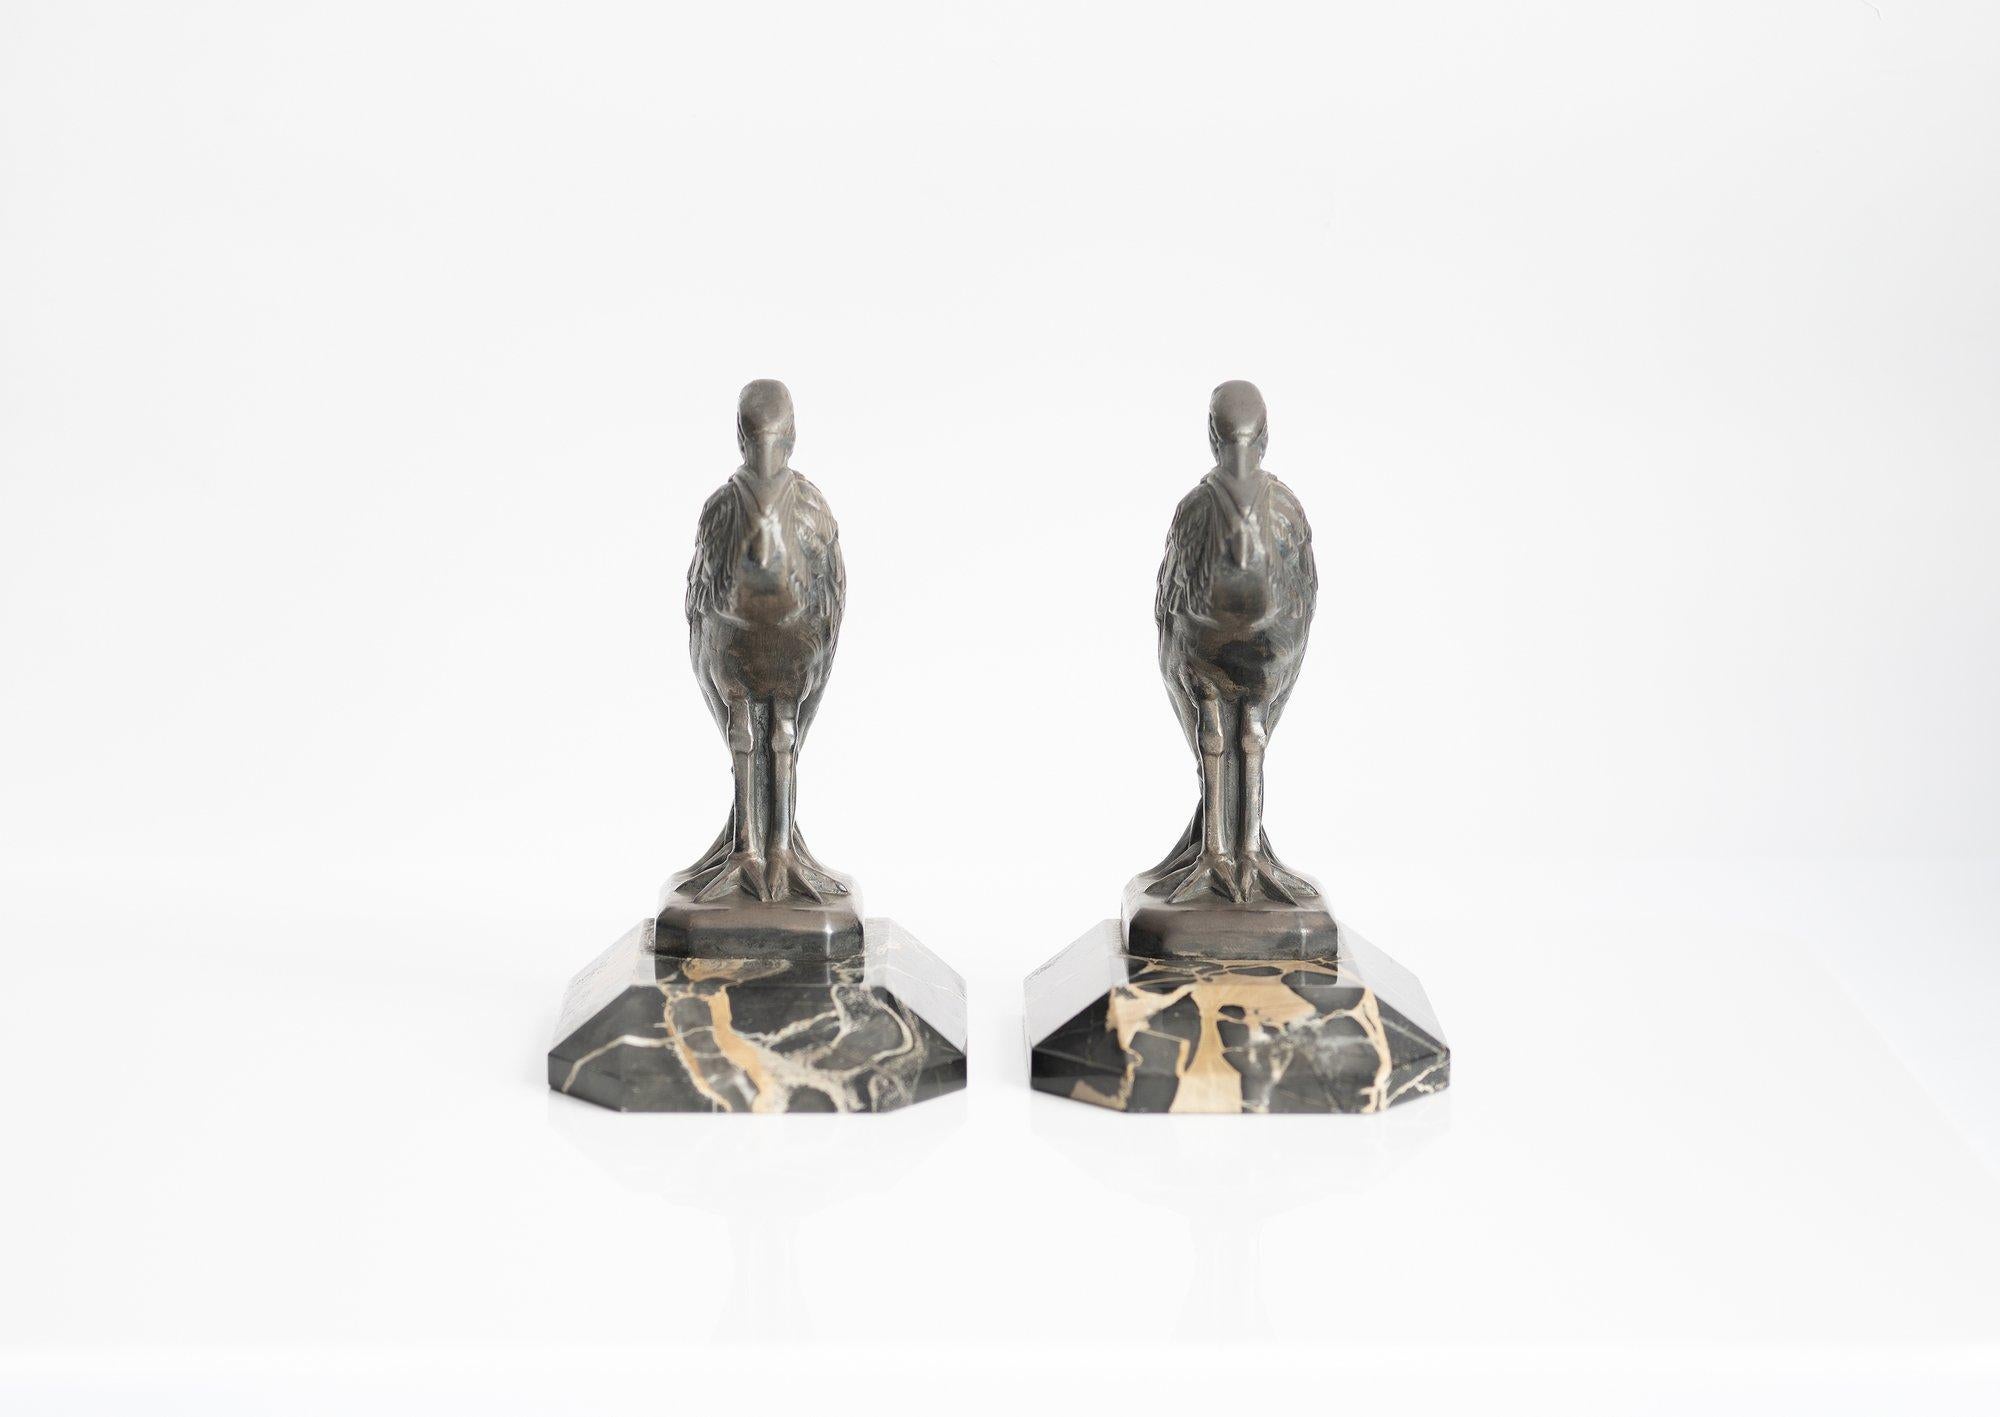 French Antique Art Deco ''Heron'' Bookends by Maurice Frecourt 1930 France Art Nouveau For Sale